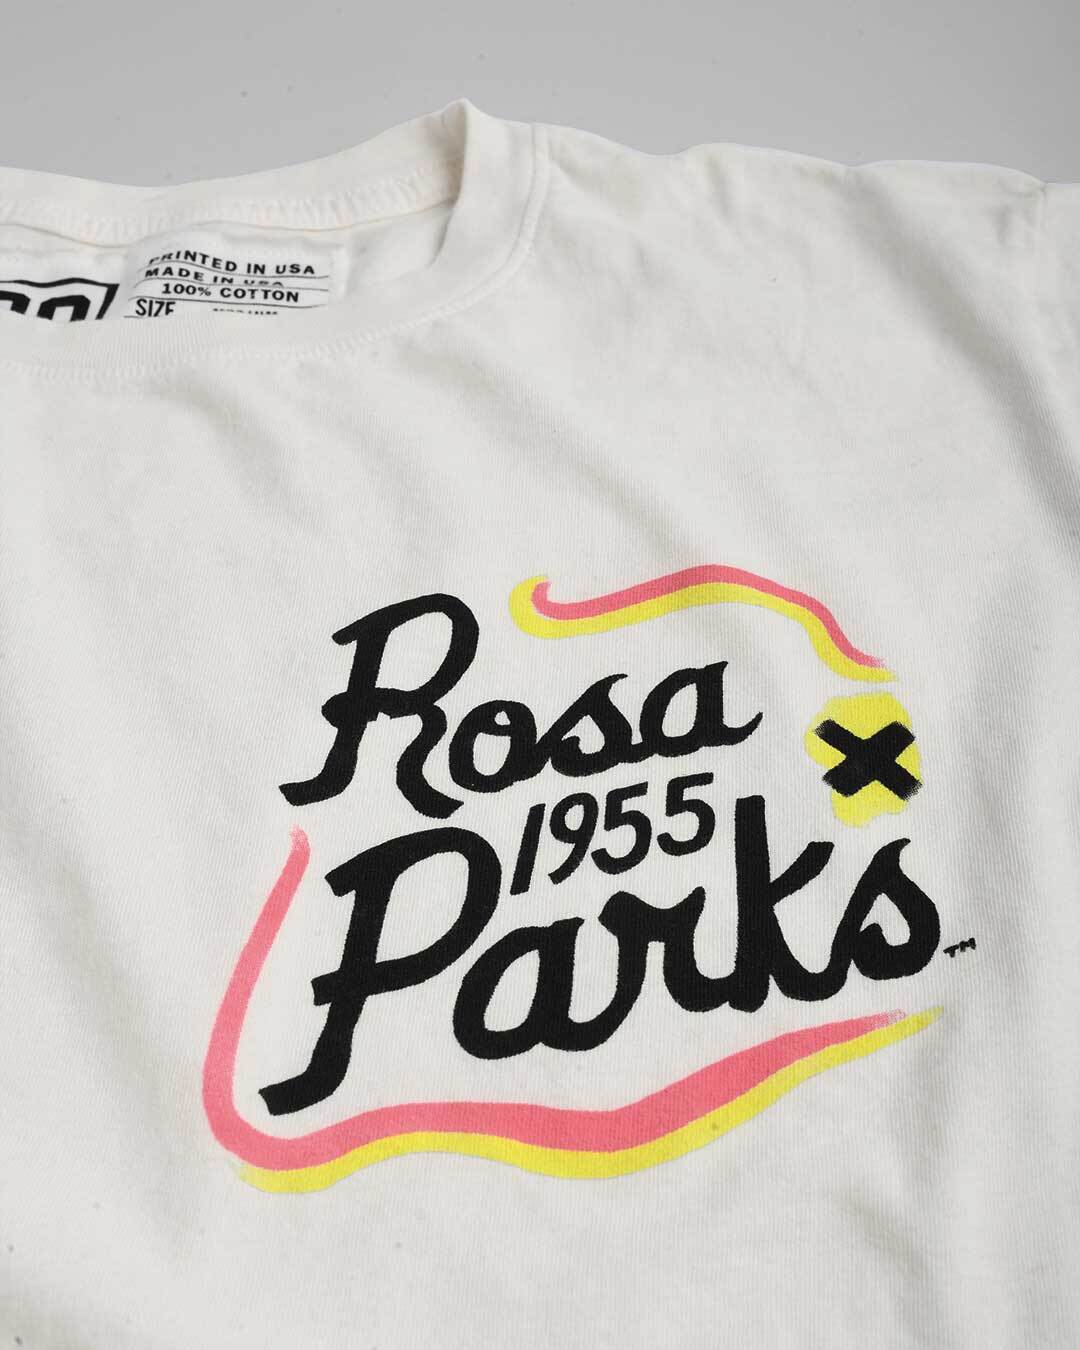 BHT - Rosa Parks 1955 White Tee - Roots of Fight Canada